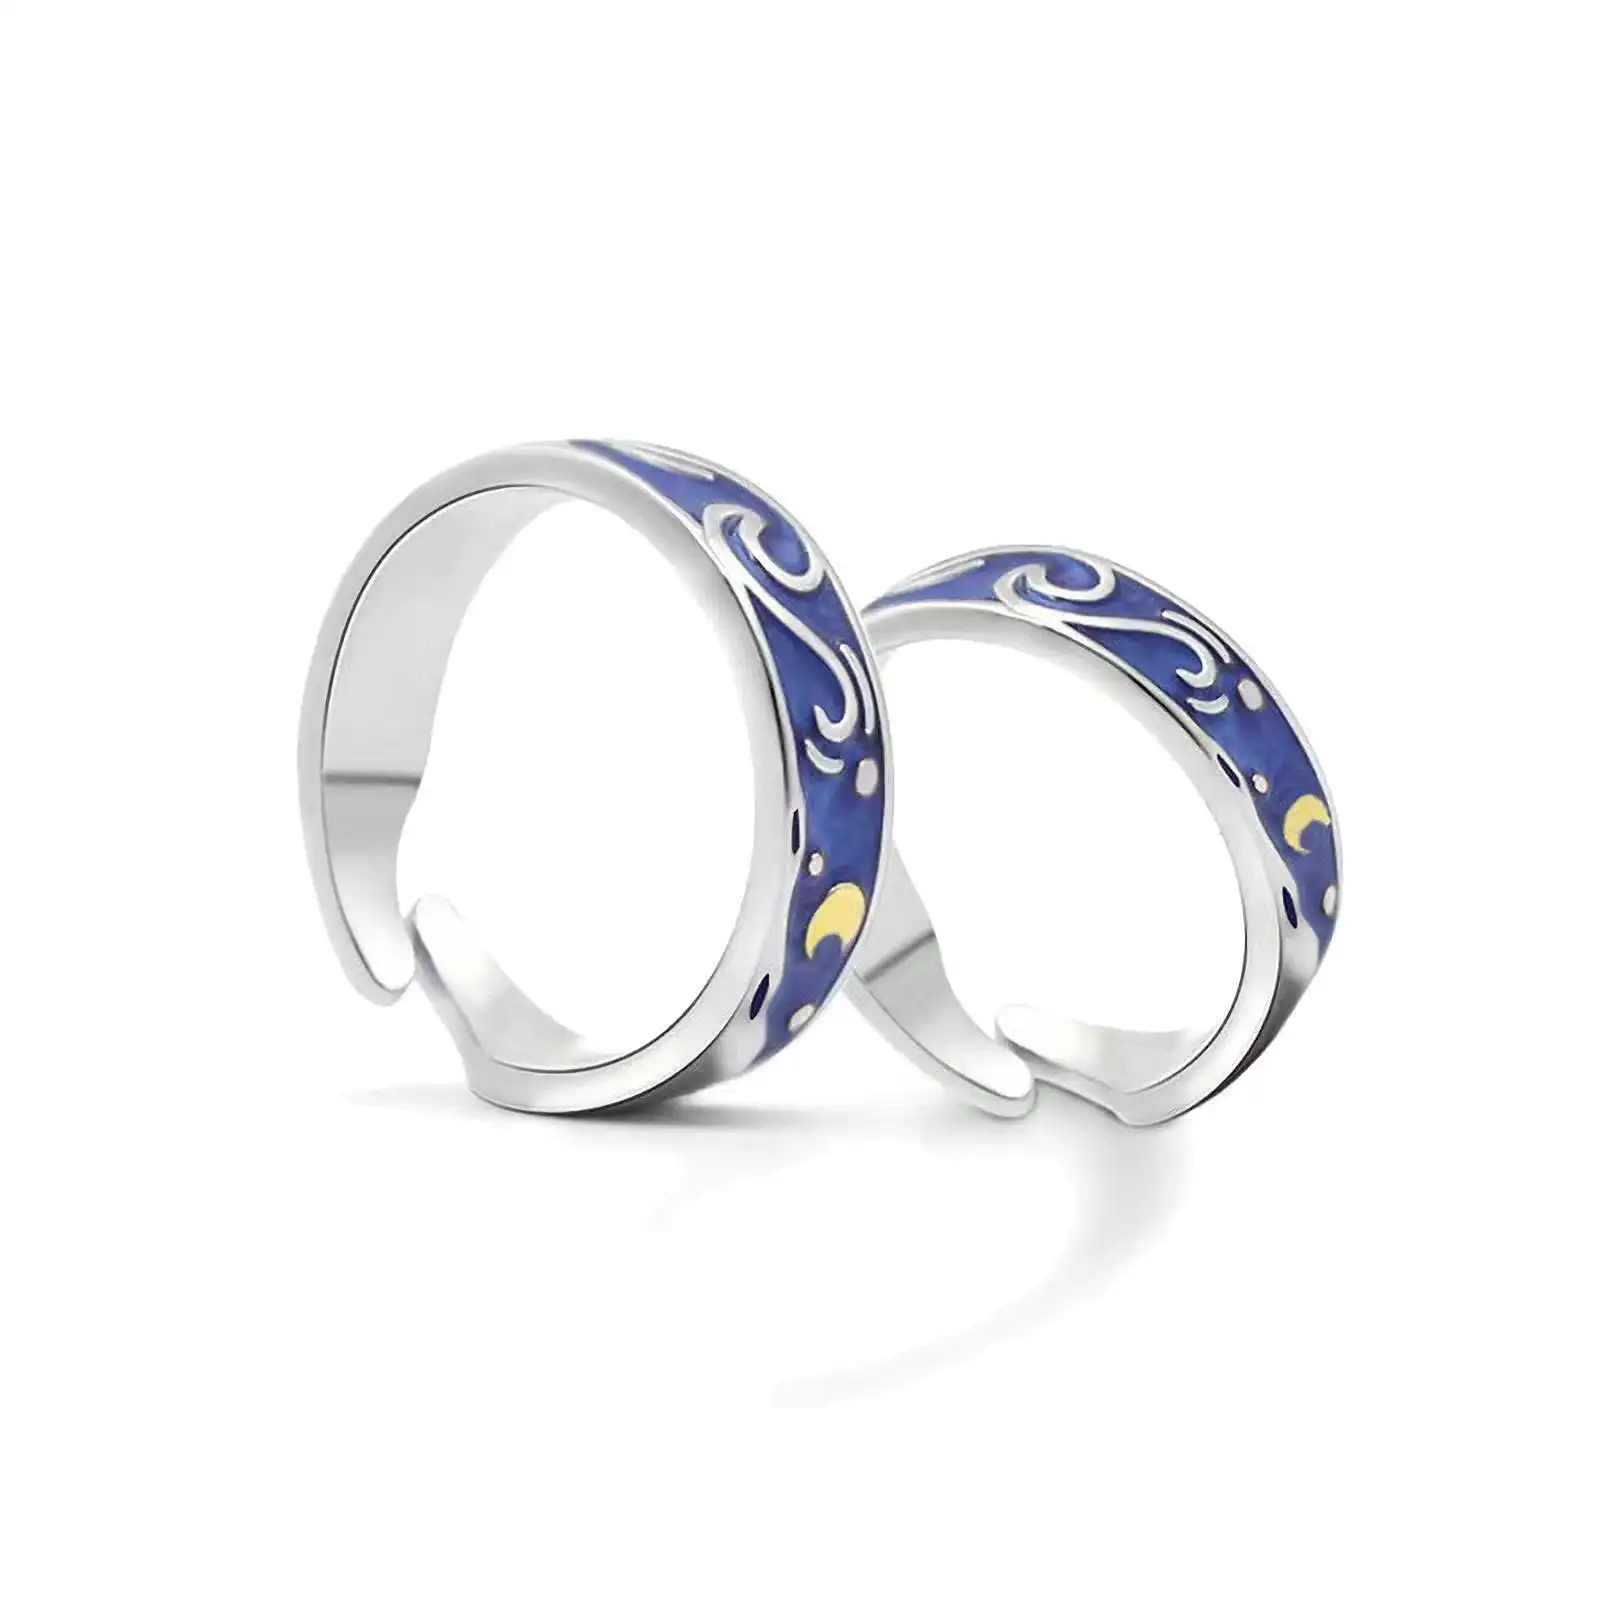 DUYIZHAO INS Jewelry Alloy Ring 2022 New Simple Fashion Van Gogh Star Moon Night Ring Personality Couple Open Pair Ring